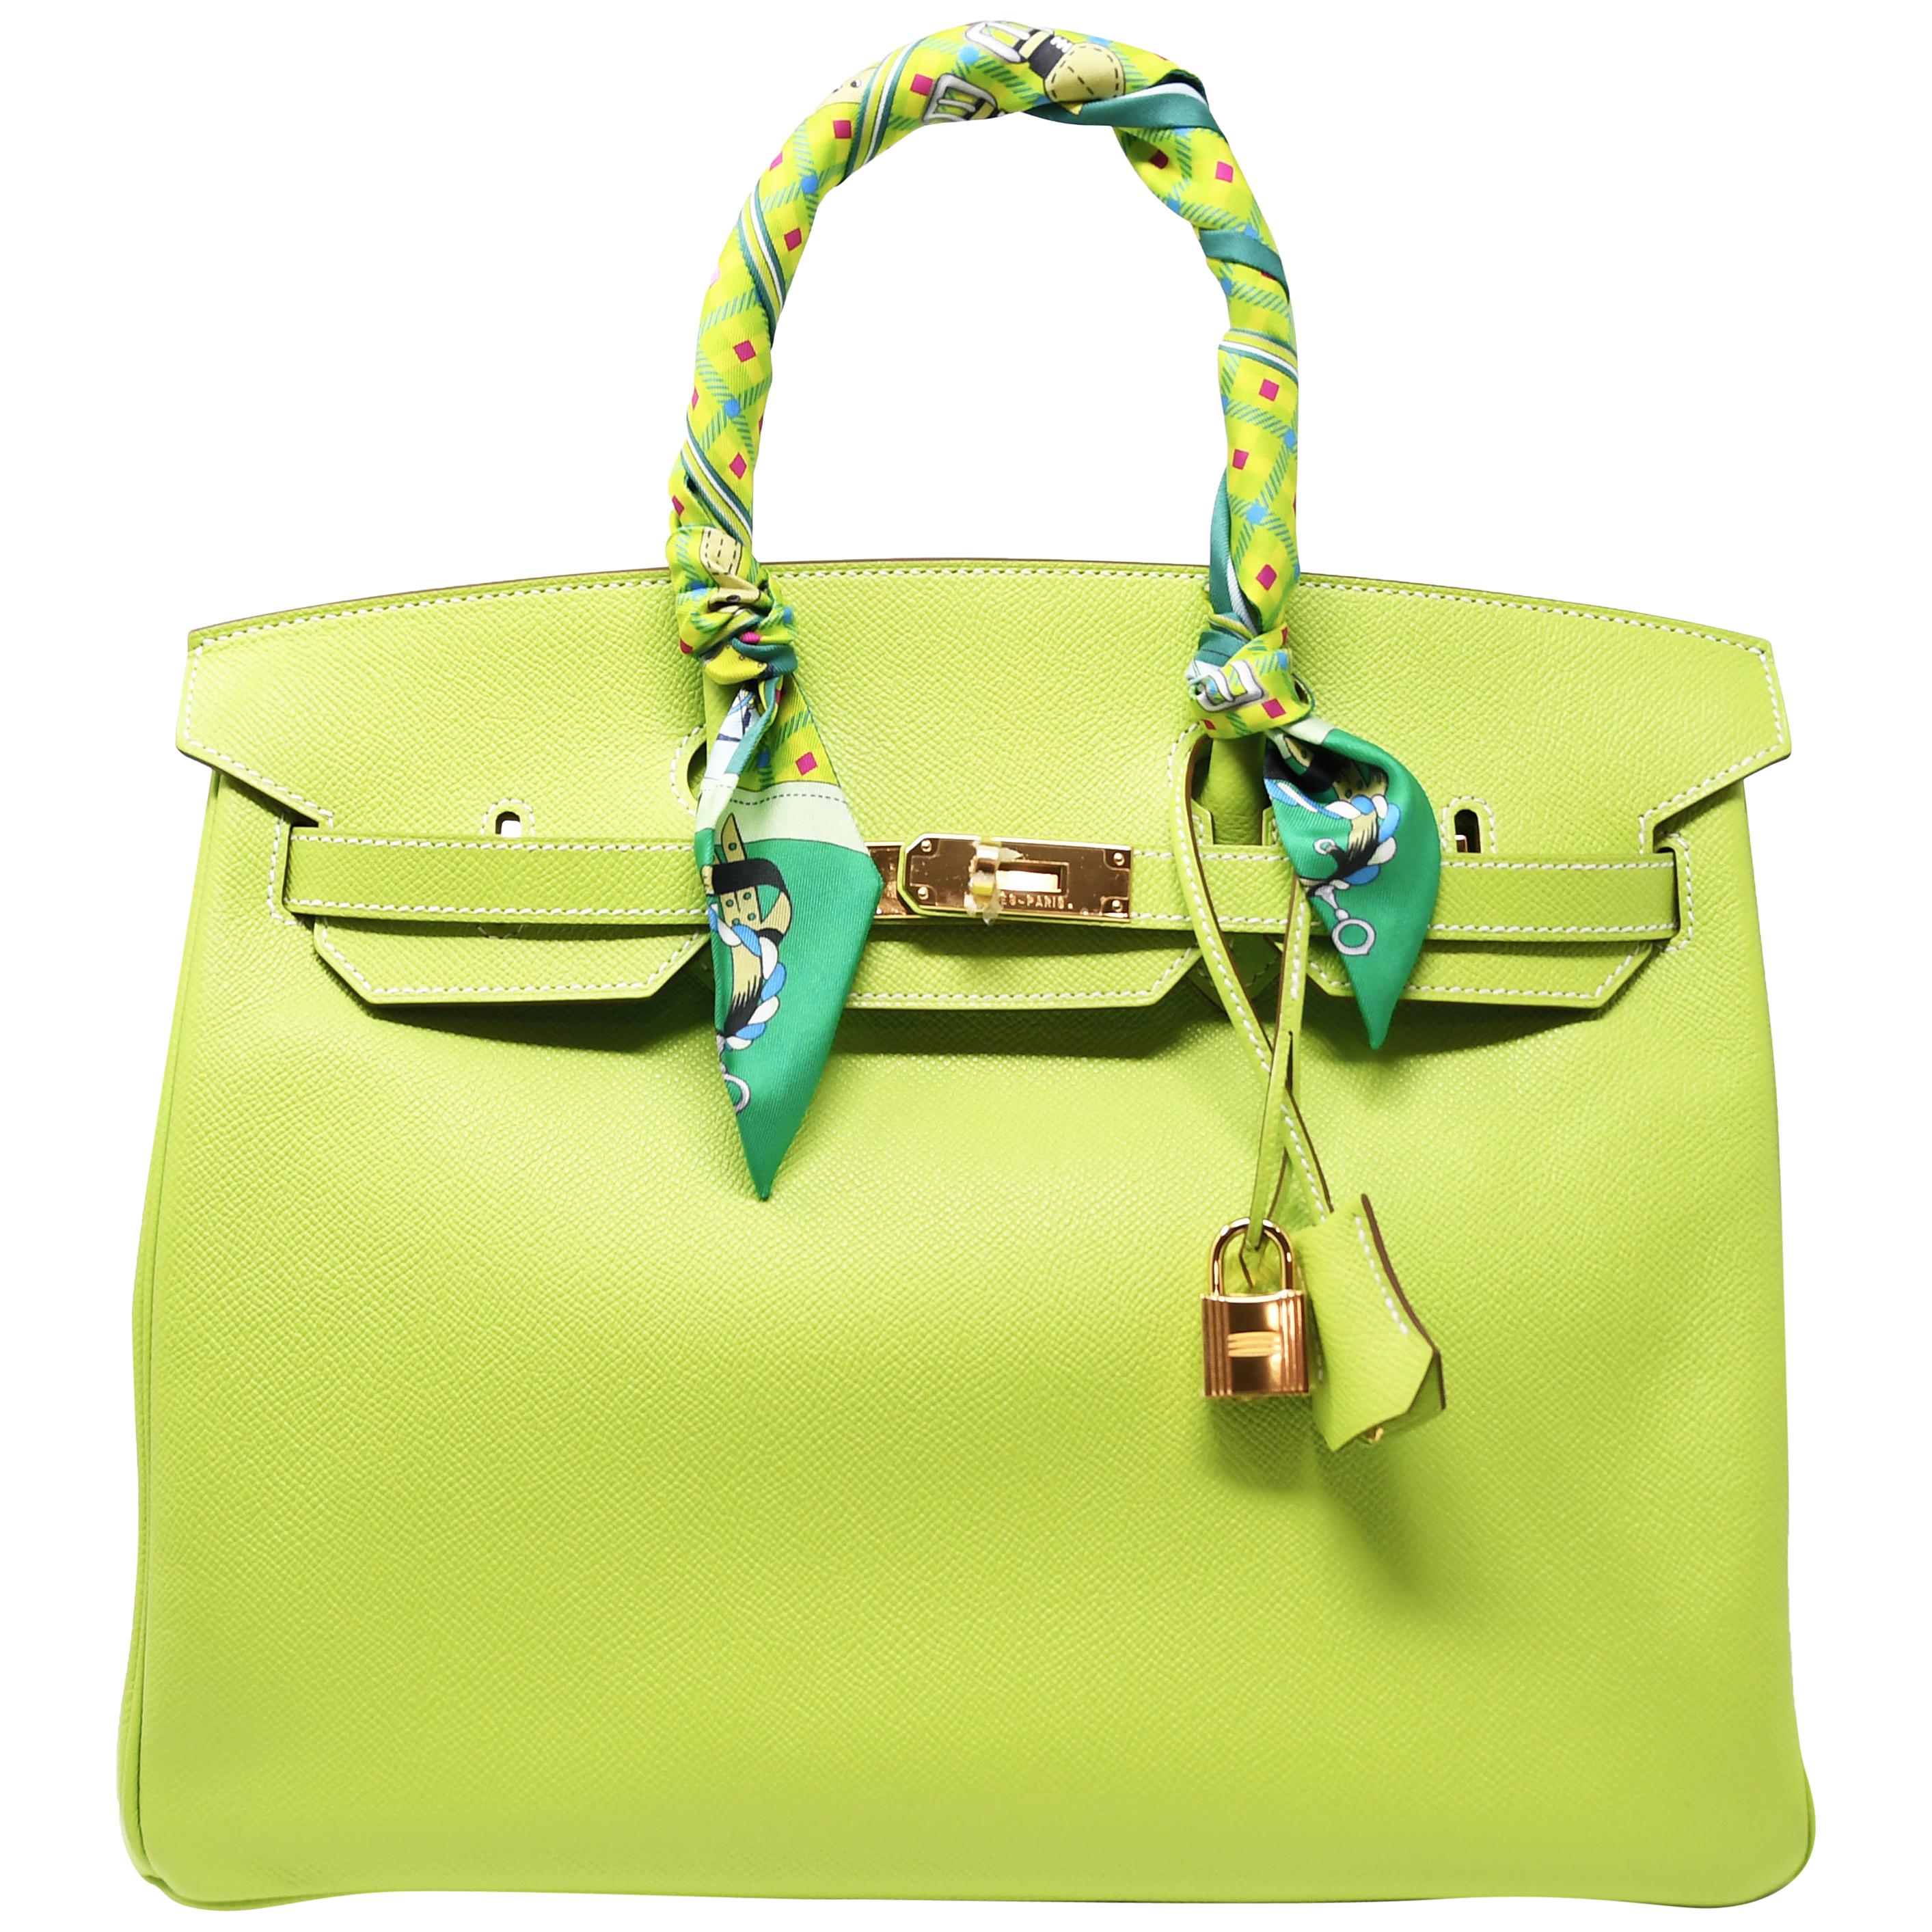 Stand out with the stunning and bold candy kiwi Birkin bag.  Perfect for beach weather and any warm vacation destination.  This is a brand new piece with plastic on the hardware and comes with the original dust cover.  Scarf sold separately.